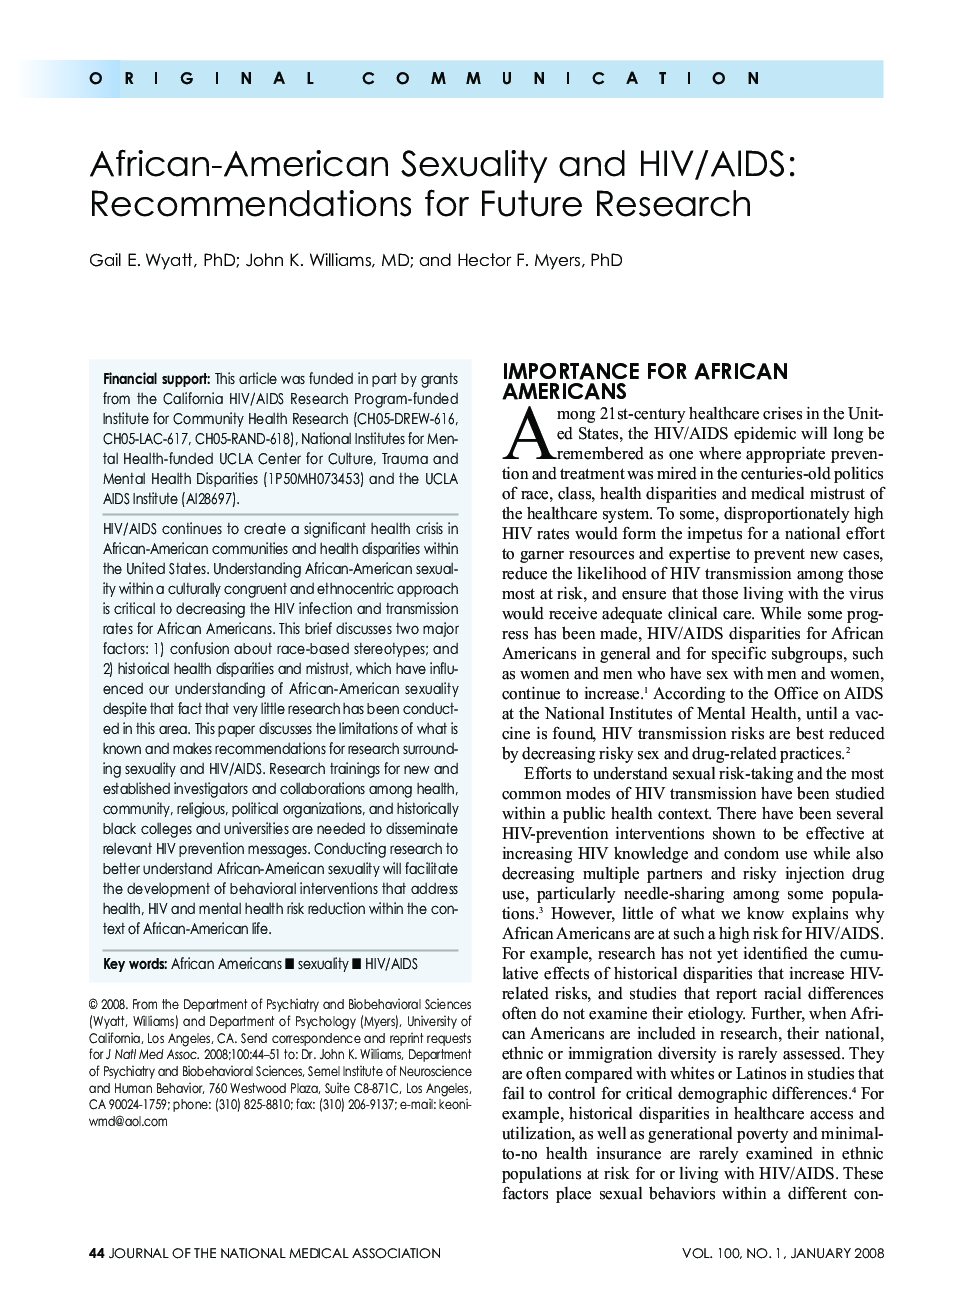 African-American Sexuality and HIV/AIDS: Recommendations for Future Research